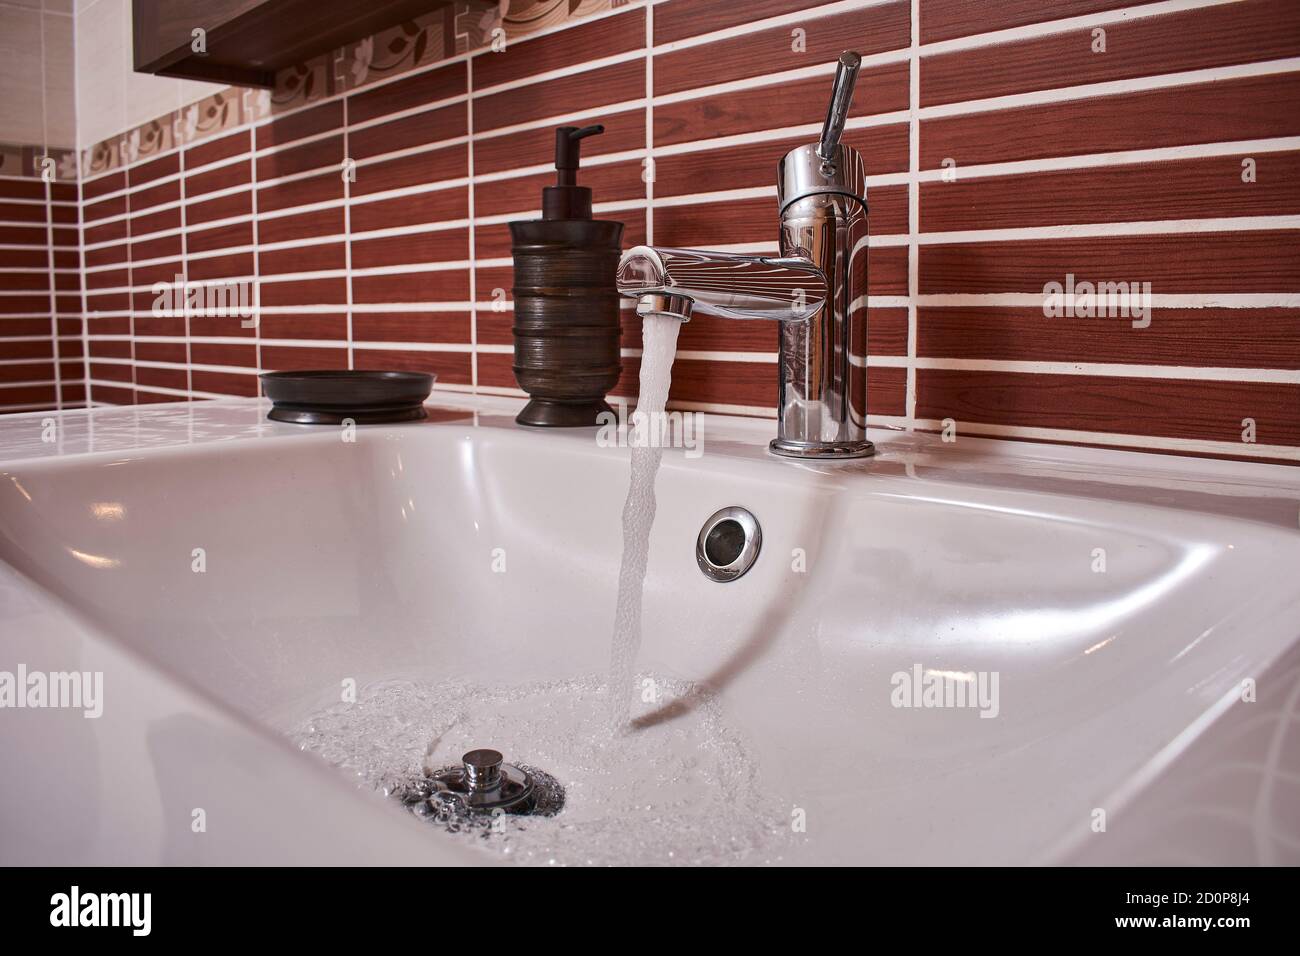 Chrome shiny faucet in an open bathroom with running water Stock Photo